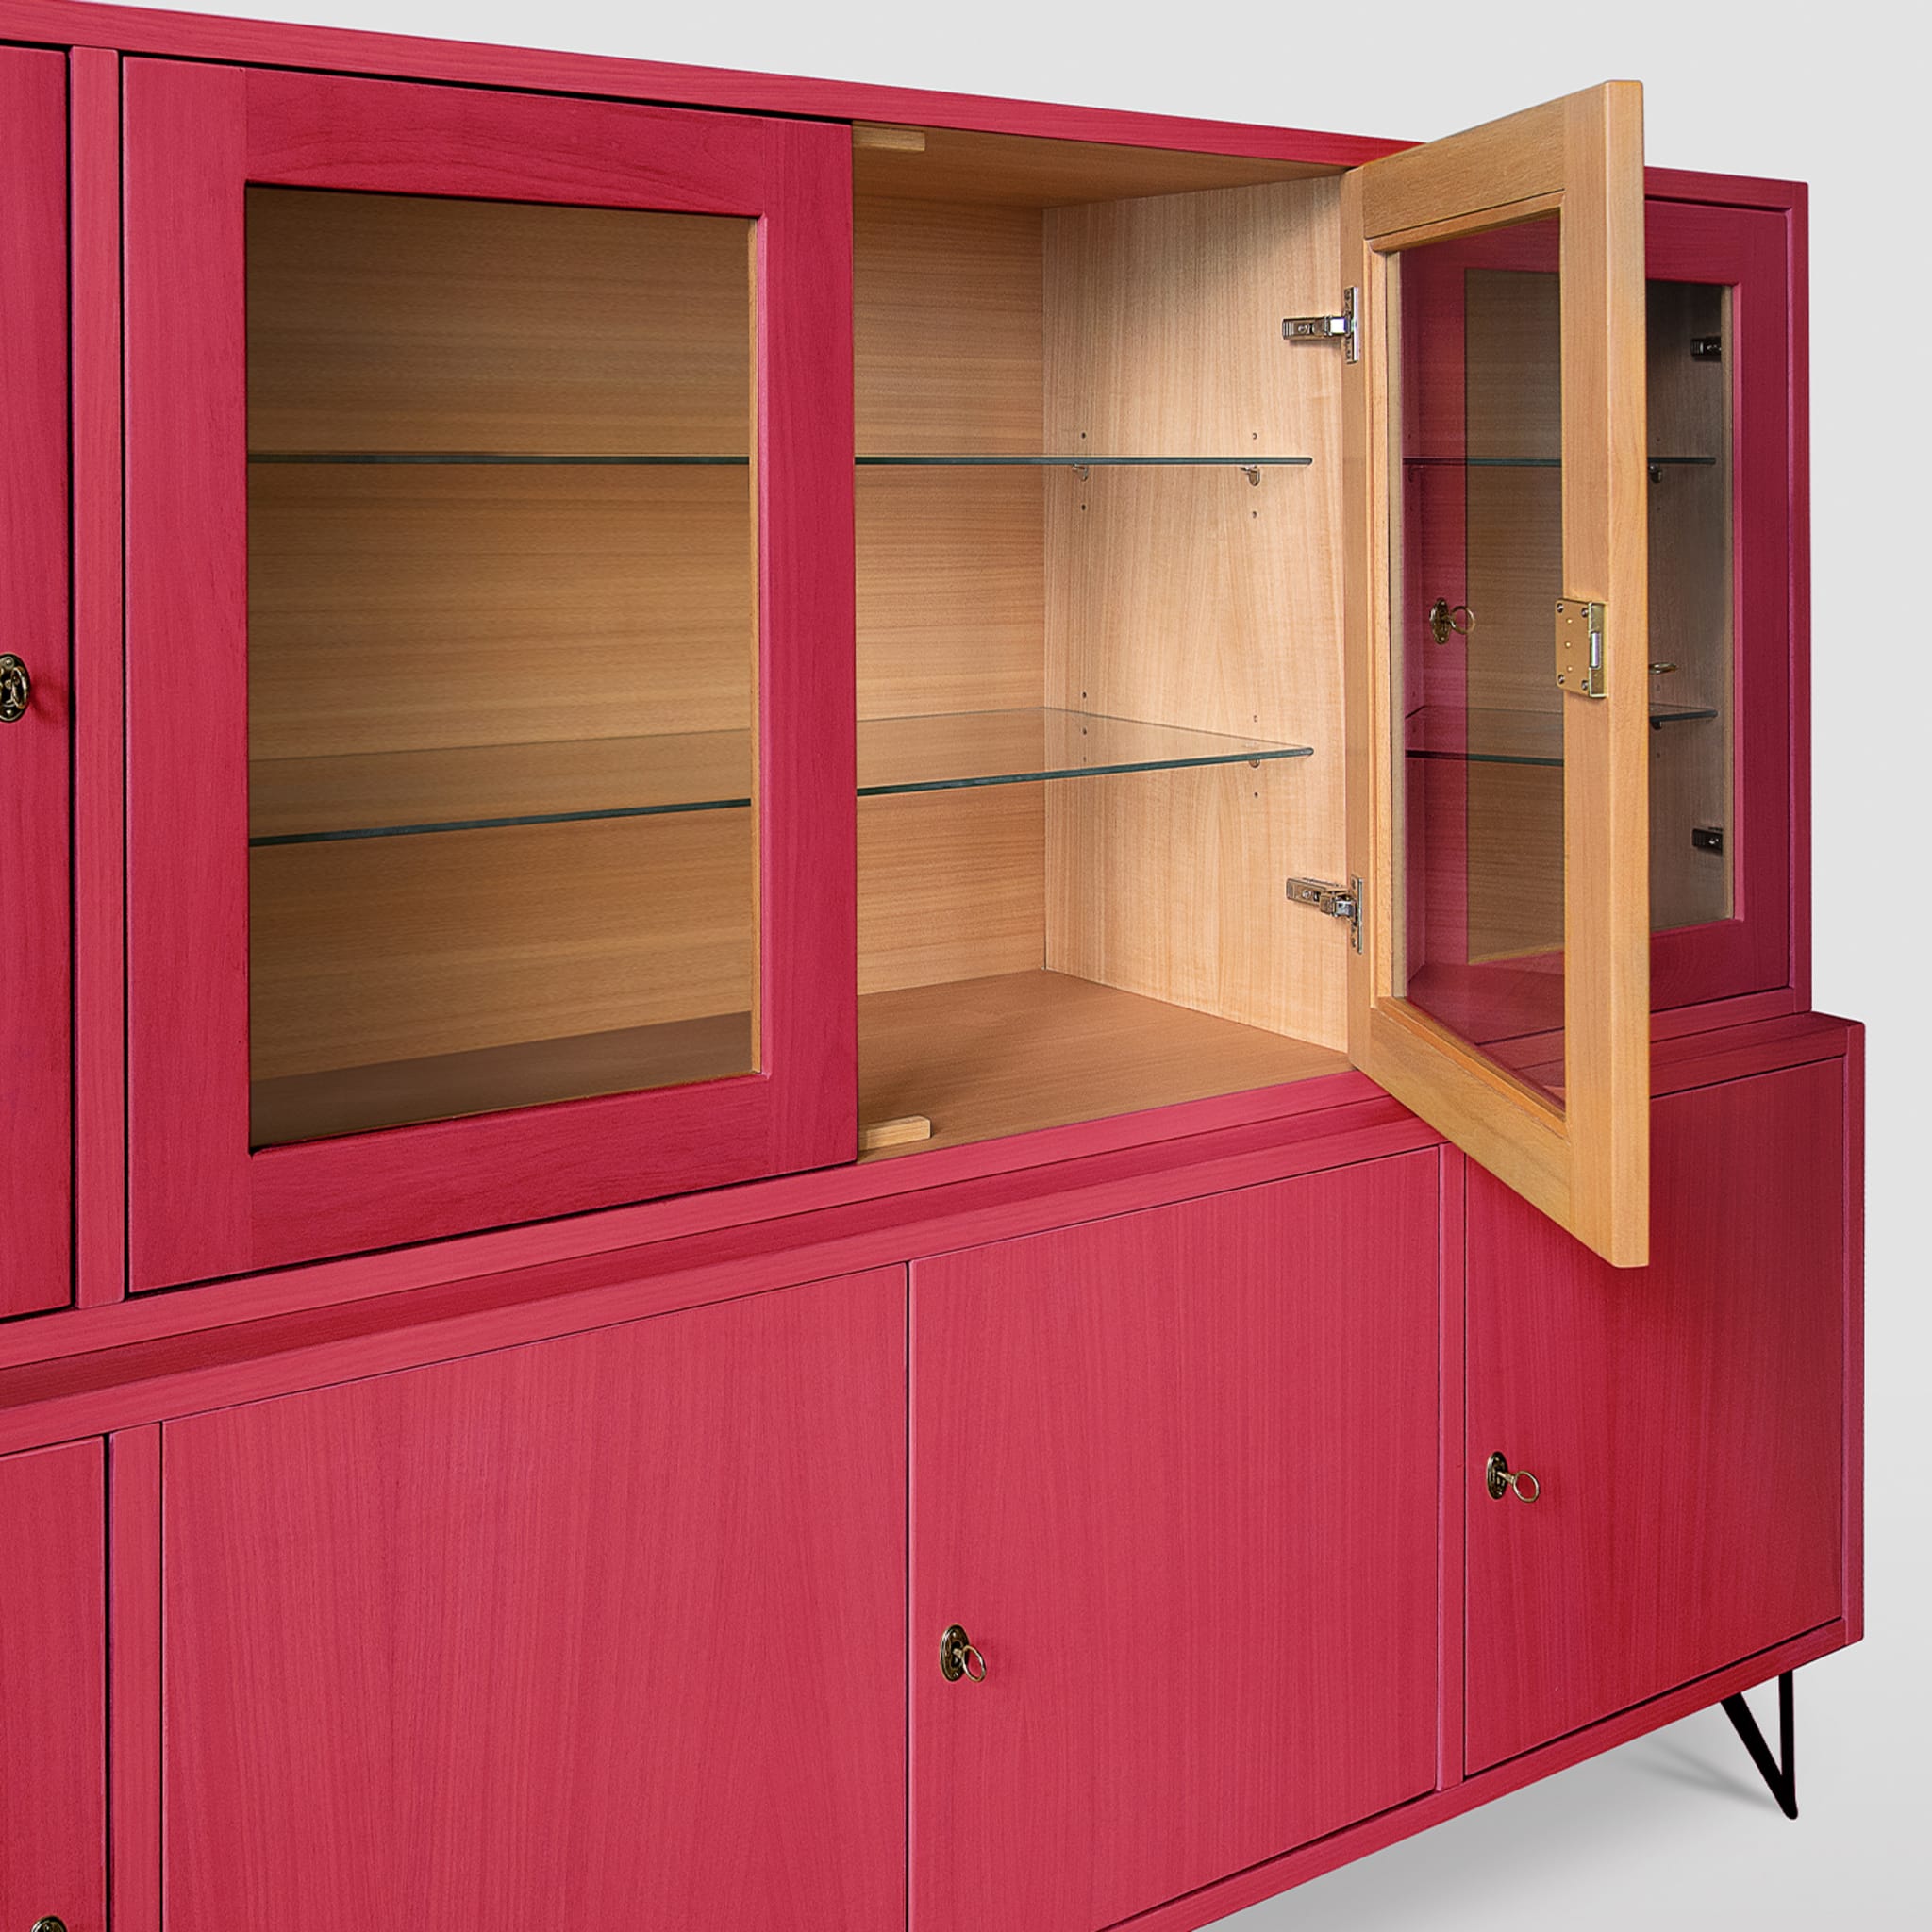 Eroica Red Cabinet by Eugenio Gambella - Alternative view 3